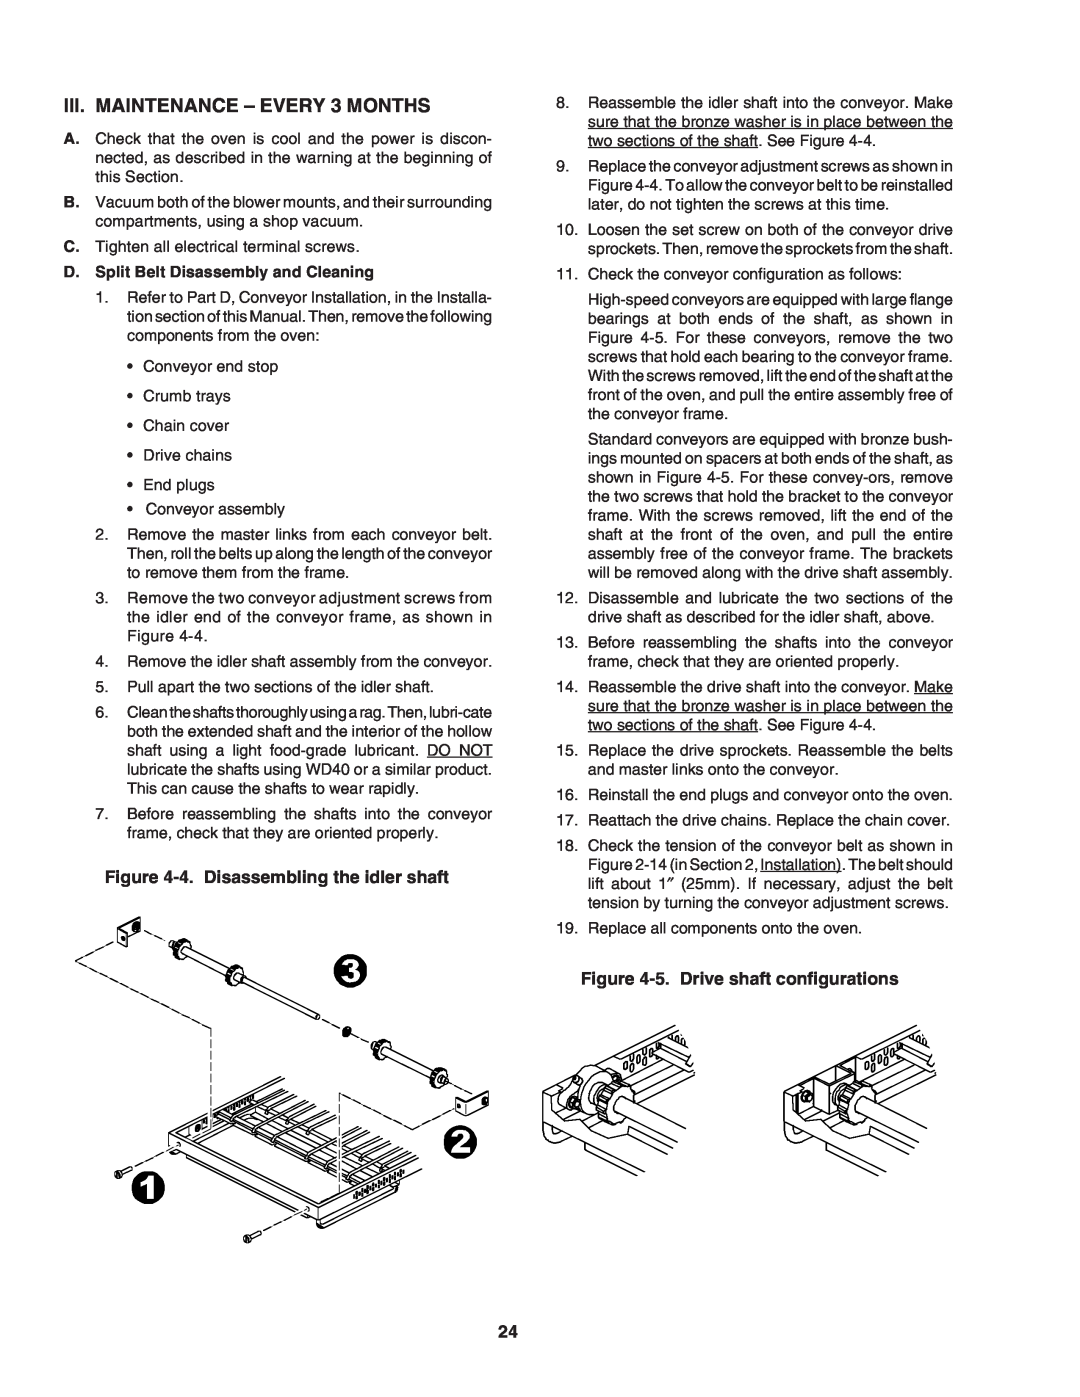 Middleby Marshall PS740E installation manual III. MAINTENANCE - EVERY 3 MONTHS, 4. Disassembling the idler shaft 